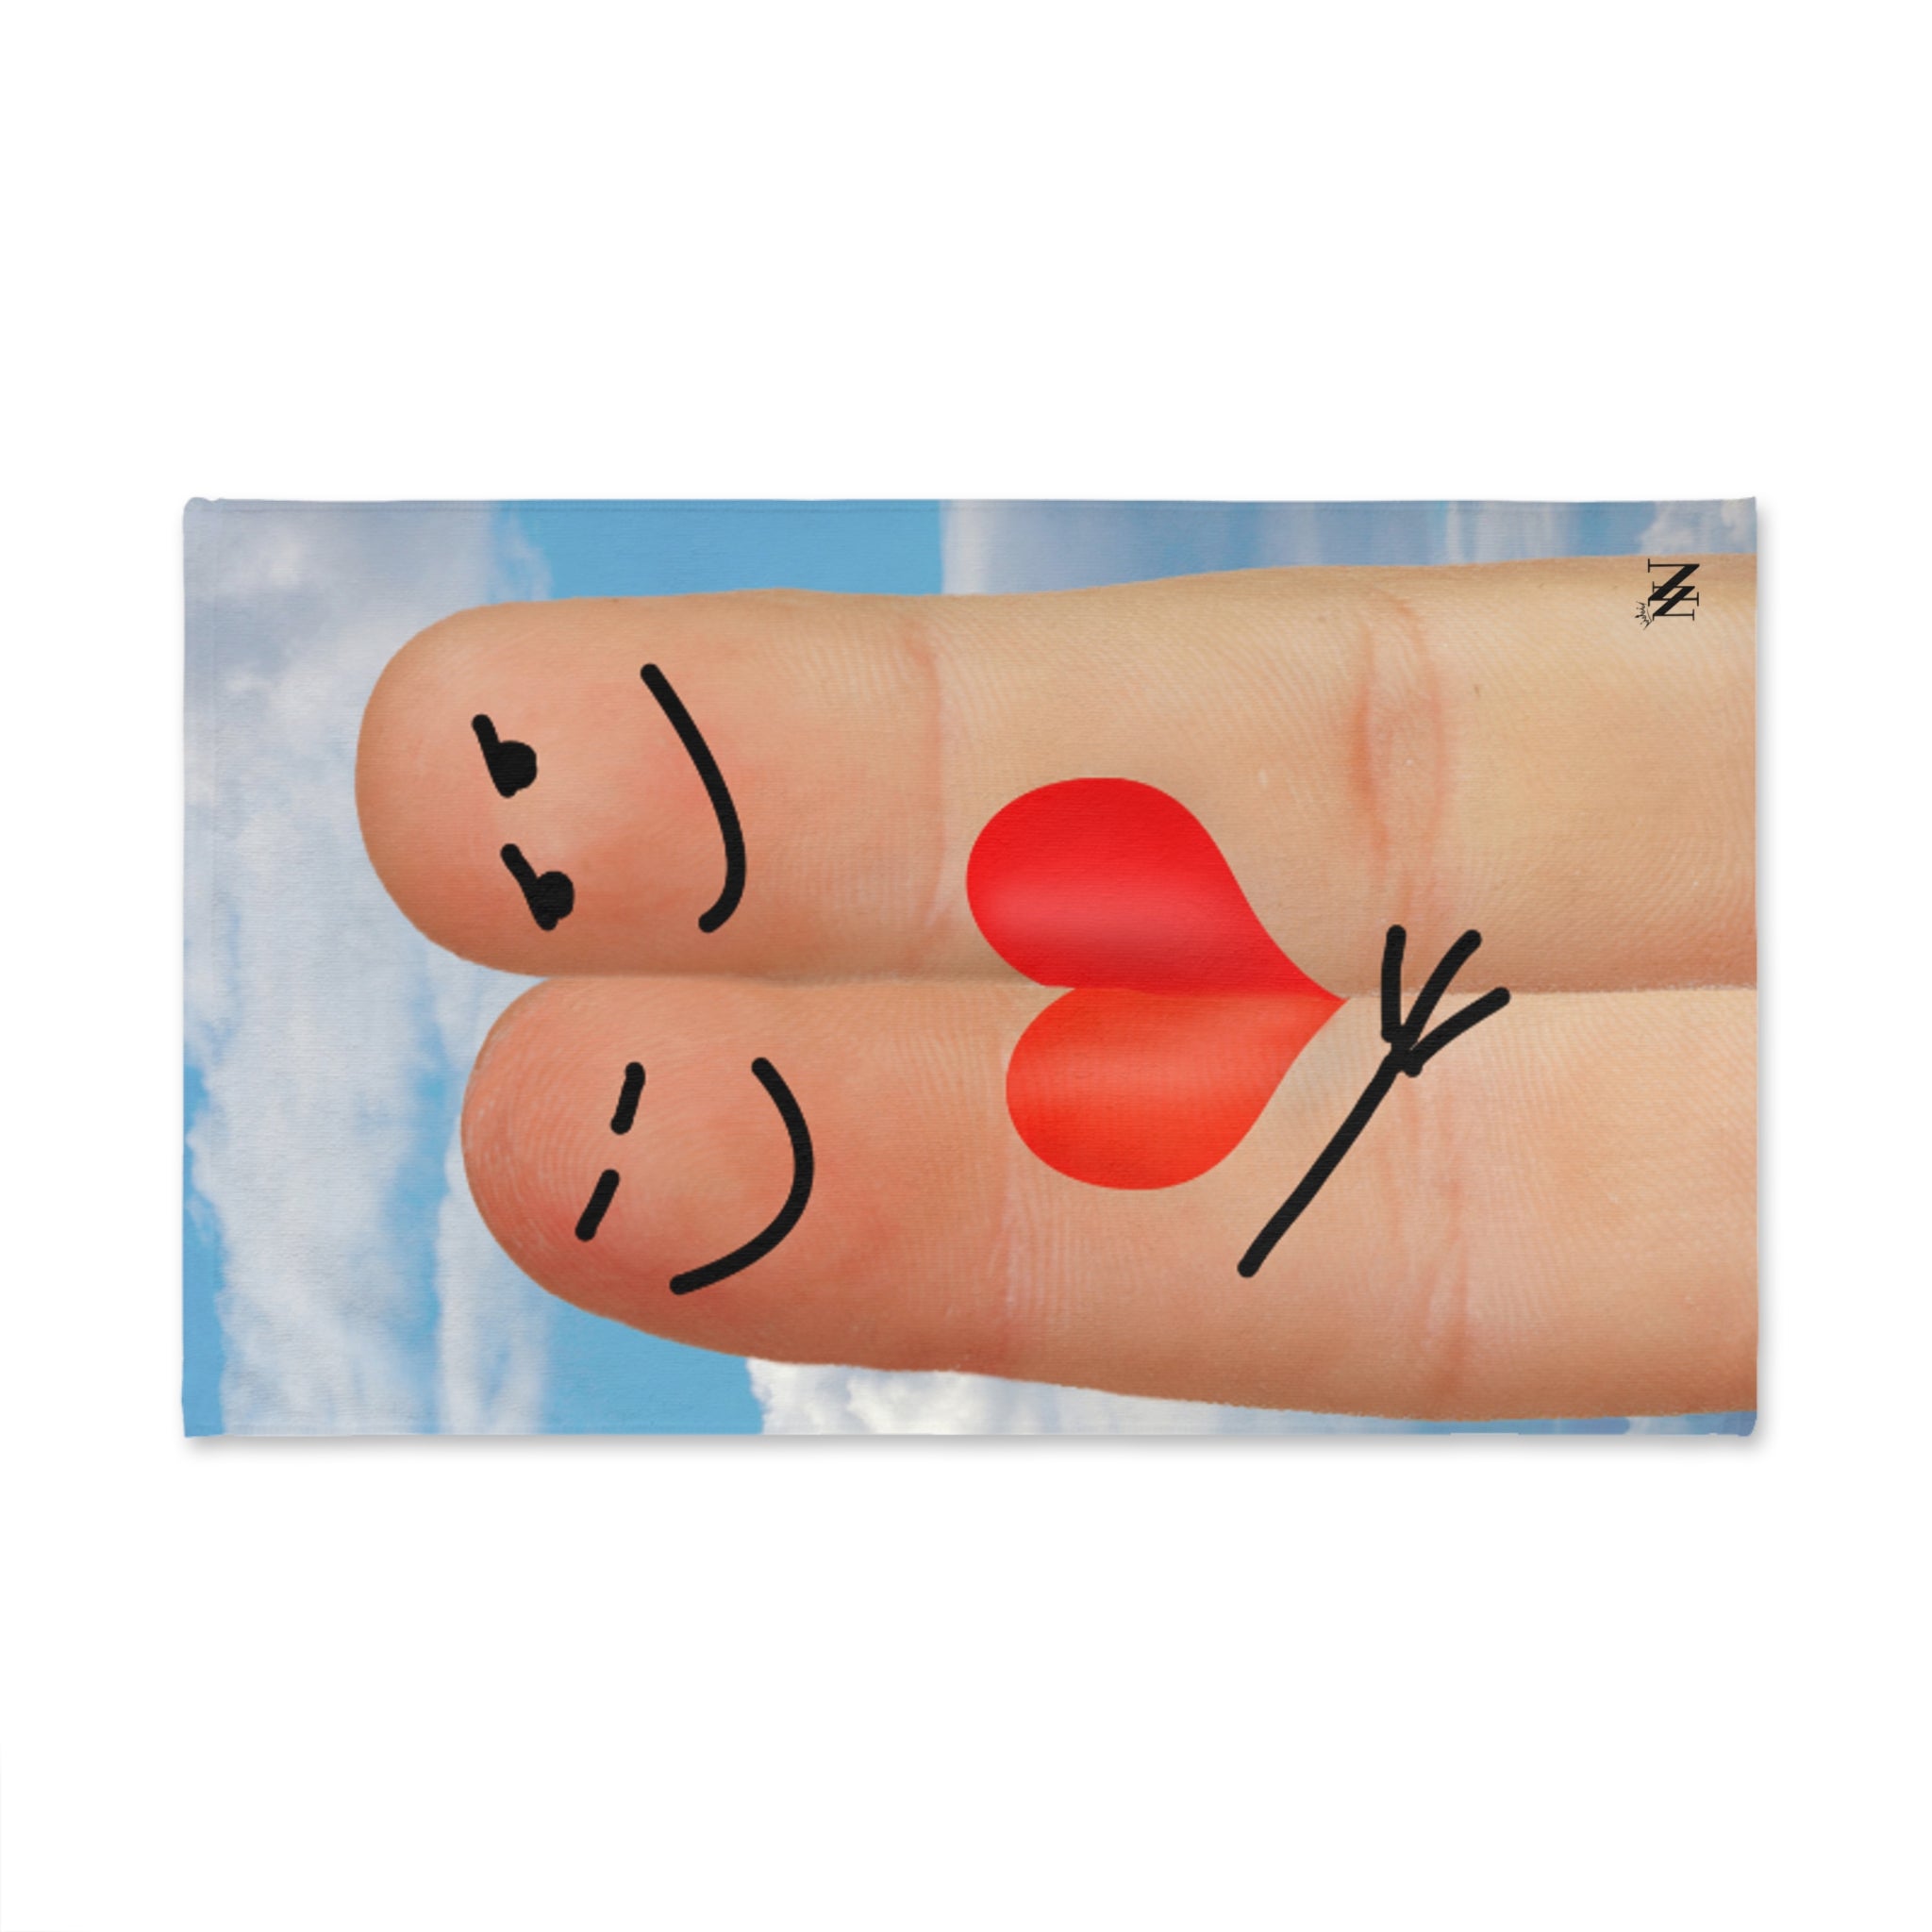 Finger People Happy Heart White | Funny Gifts for Men - Gifts for Him - Birthday Gifts for Men, Him, Her, Husband, Boyfriend, Girlfriend, New Couple Gifts, Fathers & Valentines Day Gifts, Christmas Gifts NECTAR NAPKINS